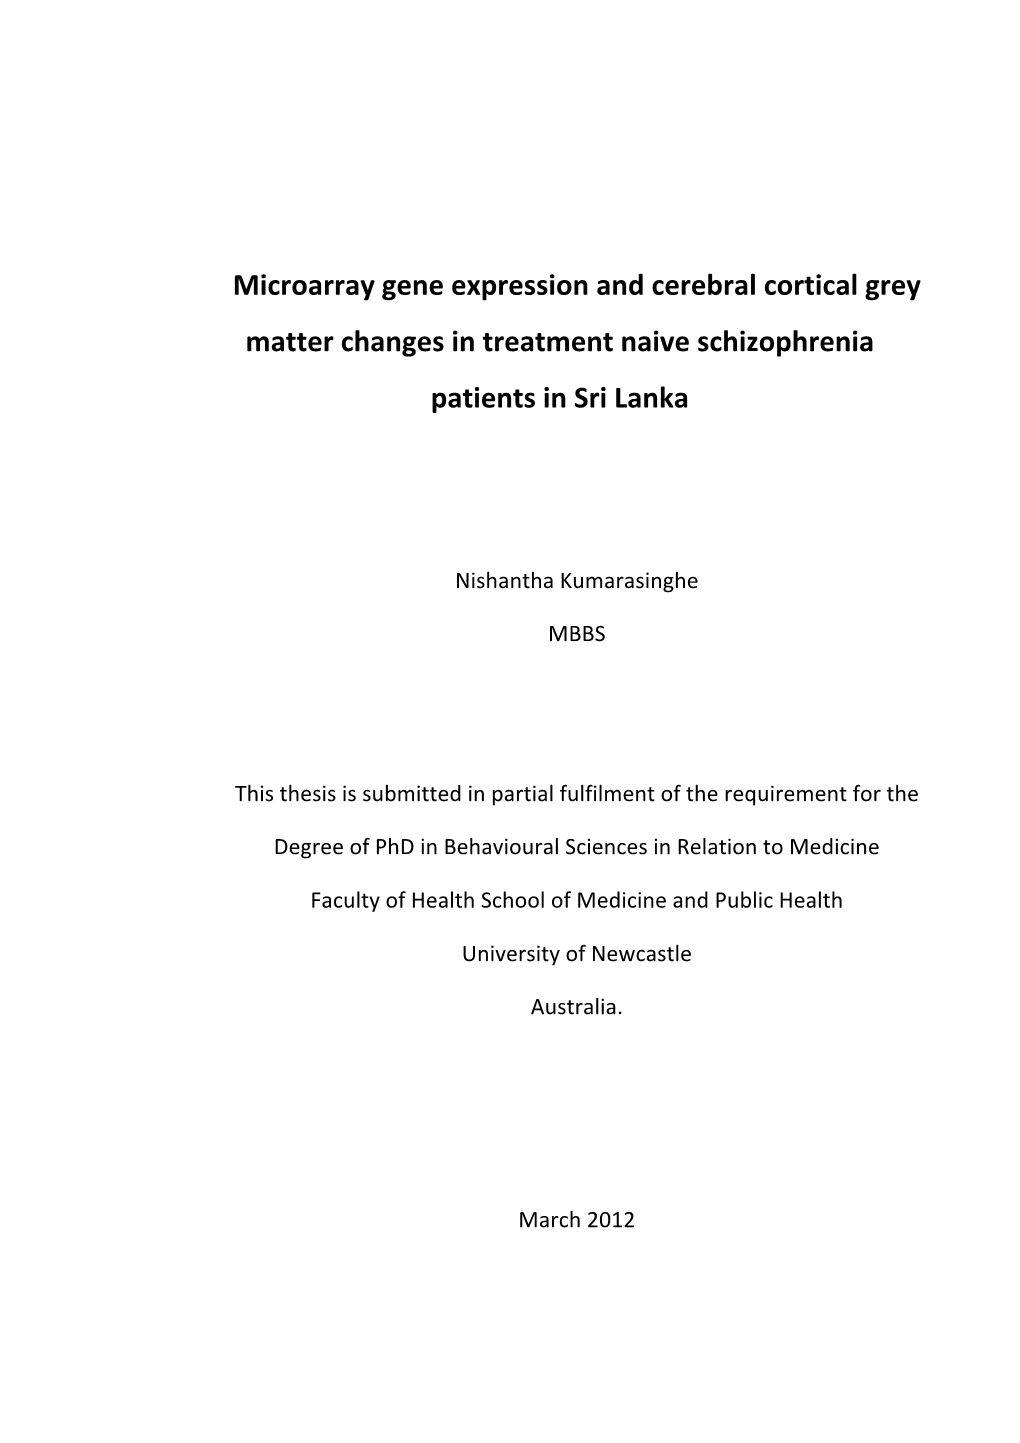 Microarray Gene Expression and Cerebral Cortical Grey Matter Changes in Treatment Naive Schizophrenia Patients in Sri Lanka